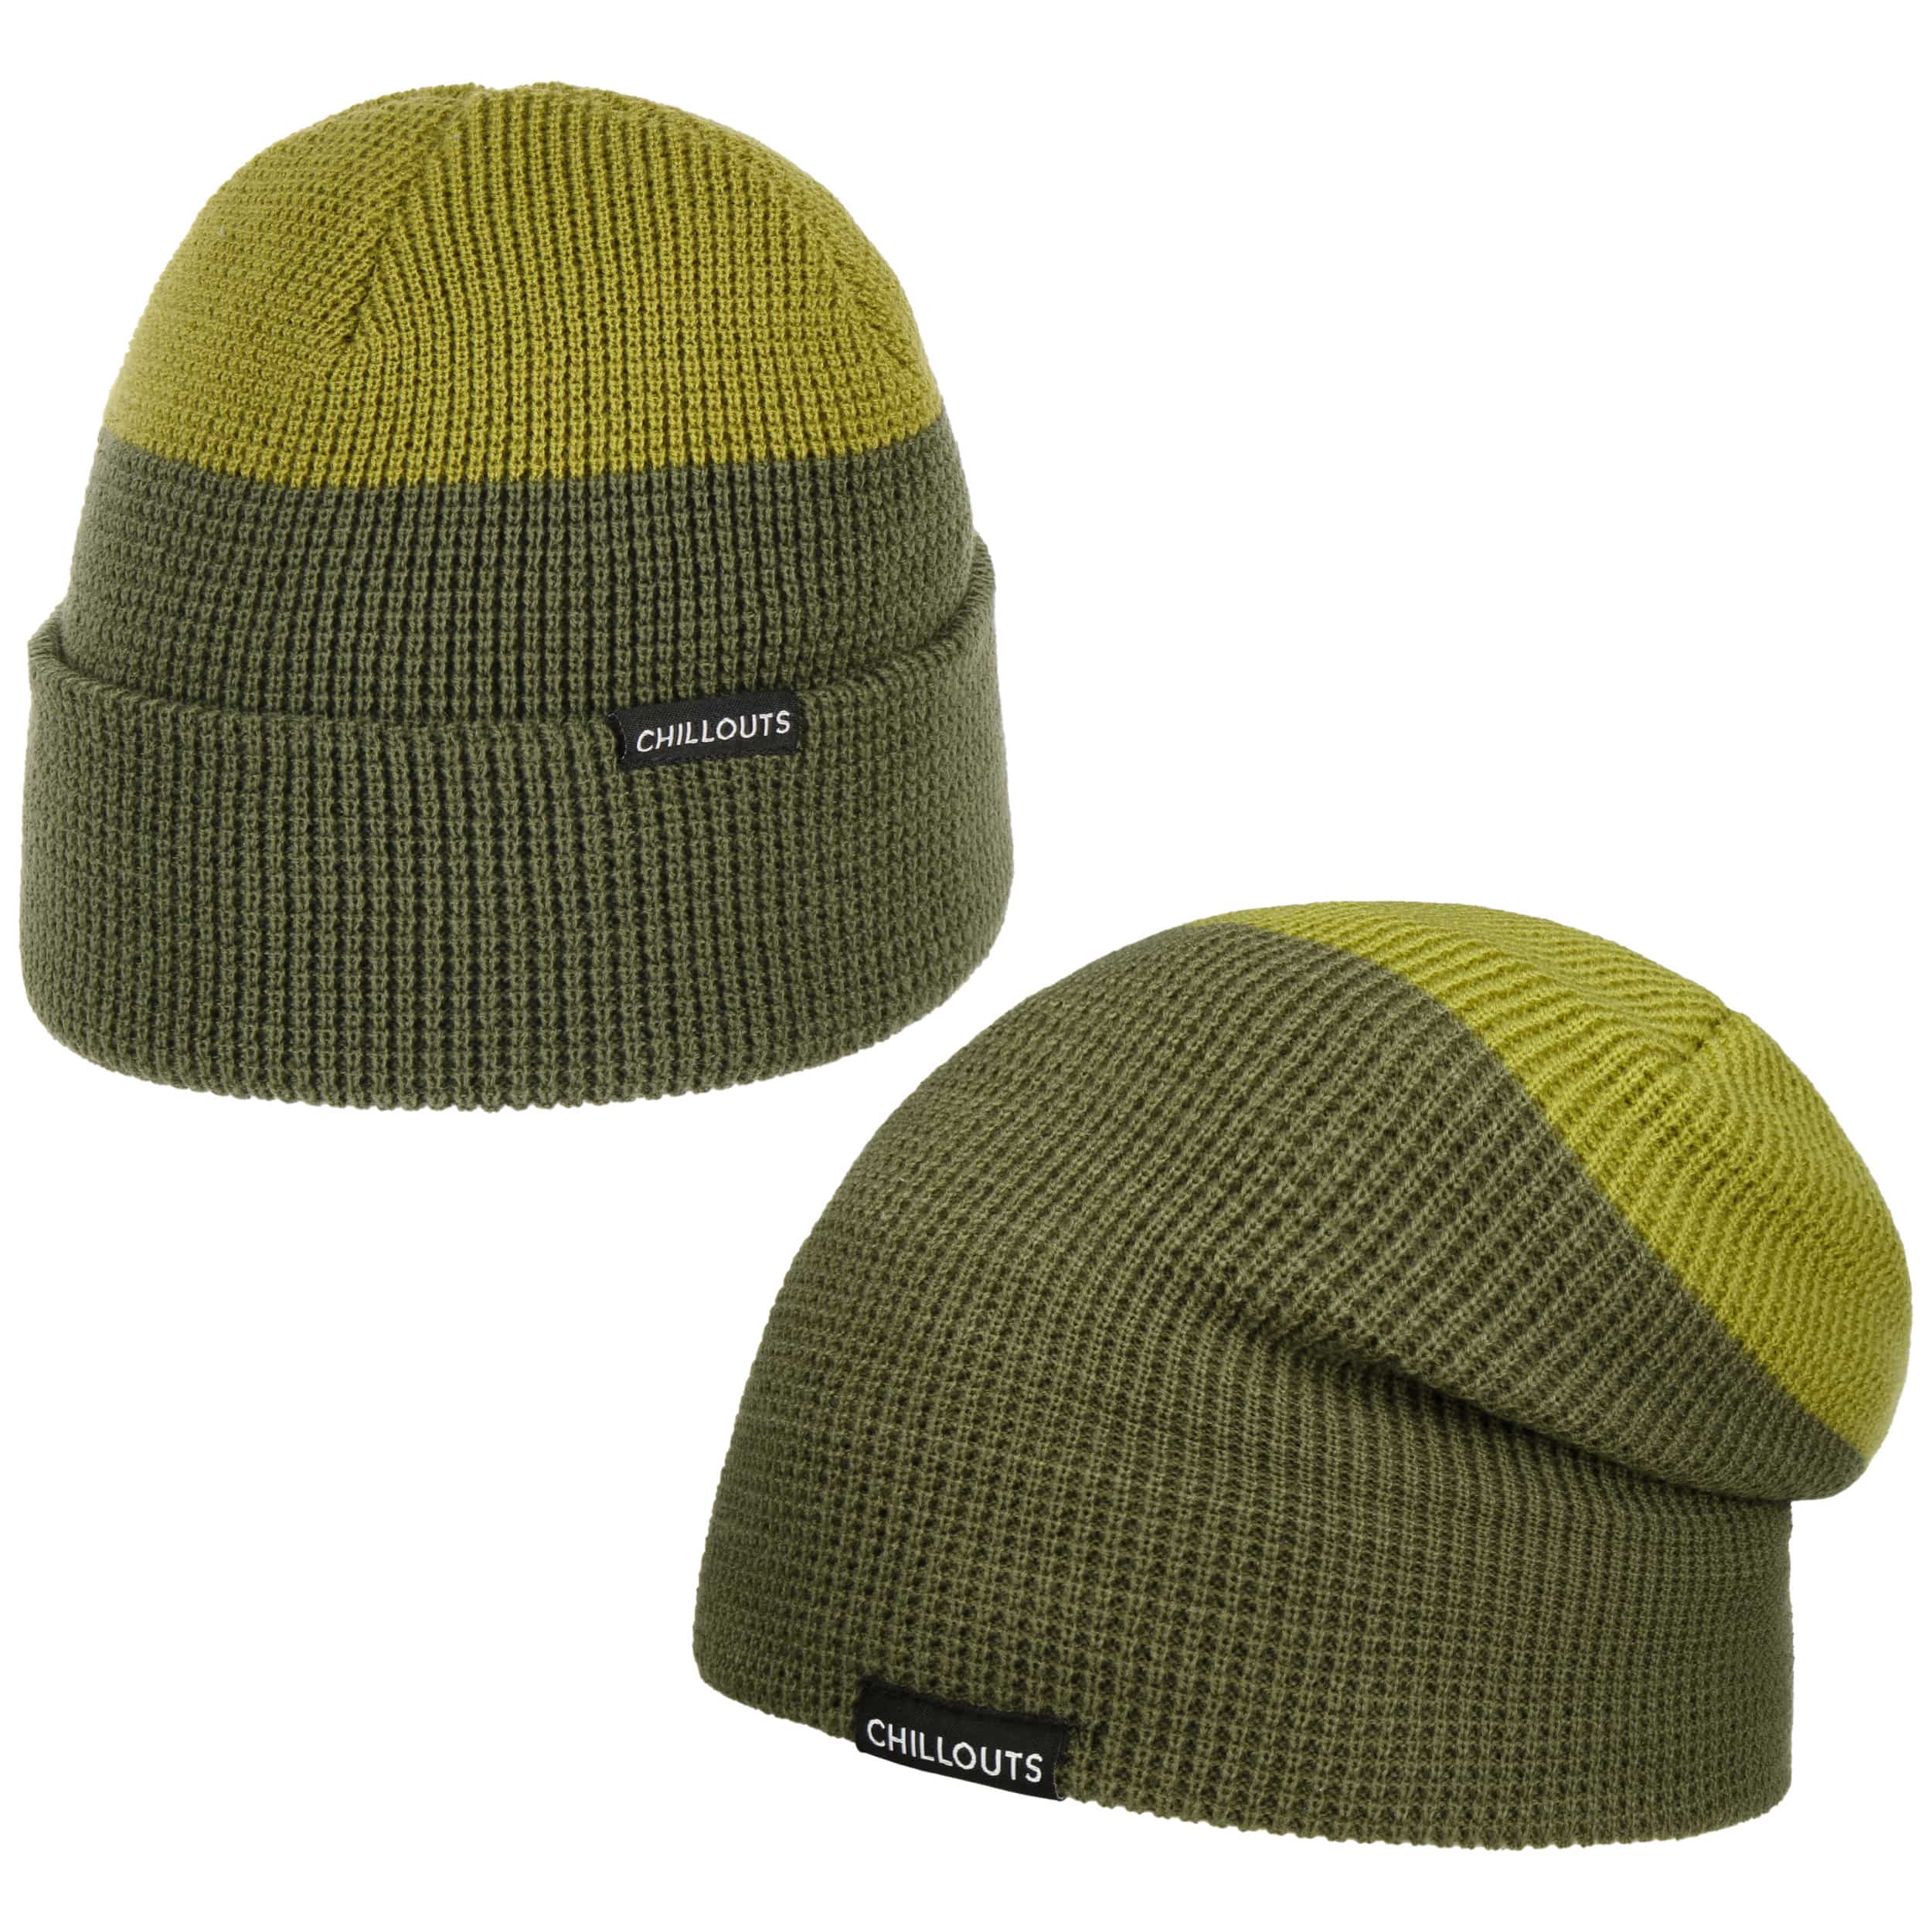 Malou Twotone Beanie Hat by Chillouts - 22,95 €